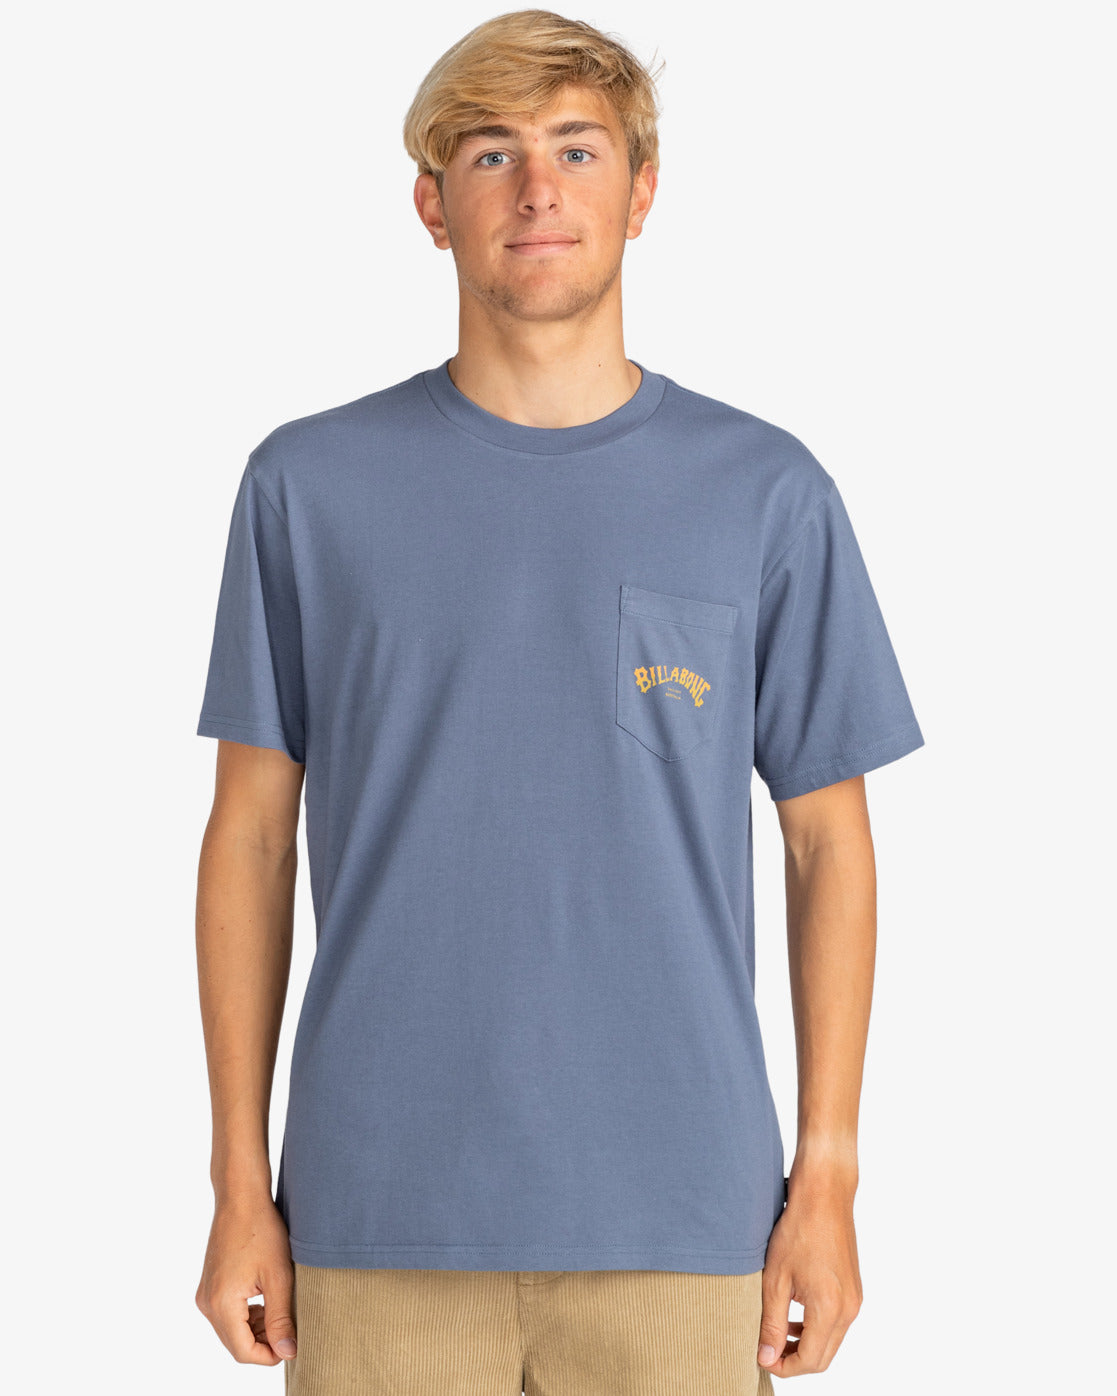 Billabong Stacked Arch T-Shirt in Slate Blue